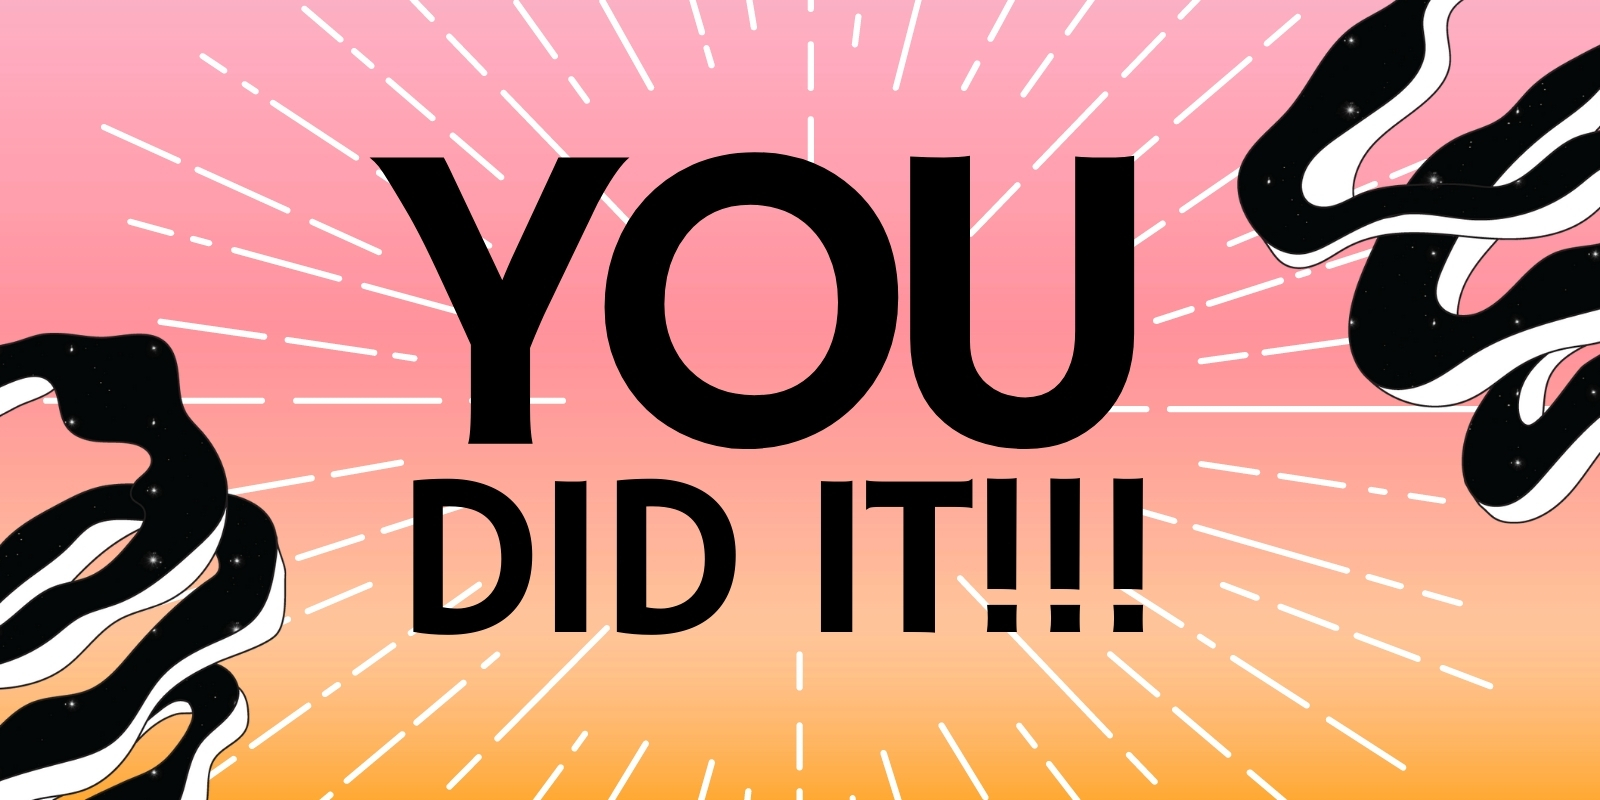 An image with a beaming sunrise gradient background. It says "YOU DID IT!!!" on it